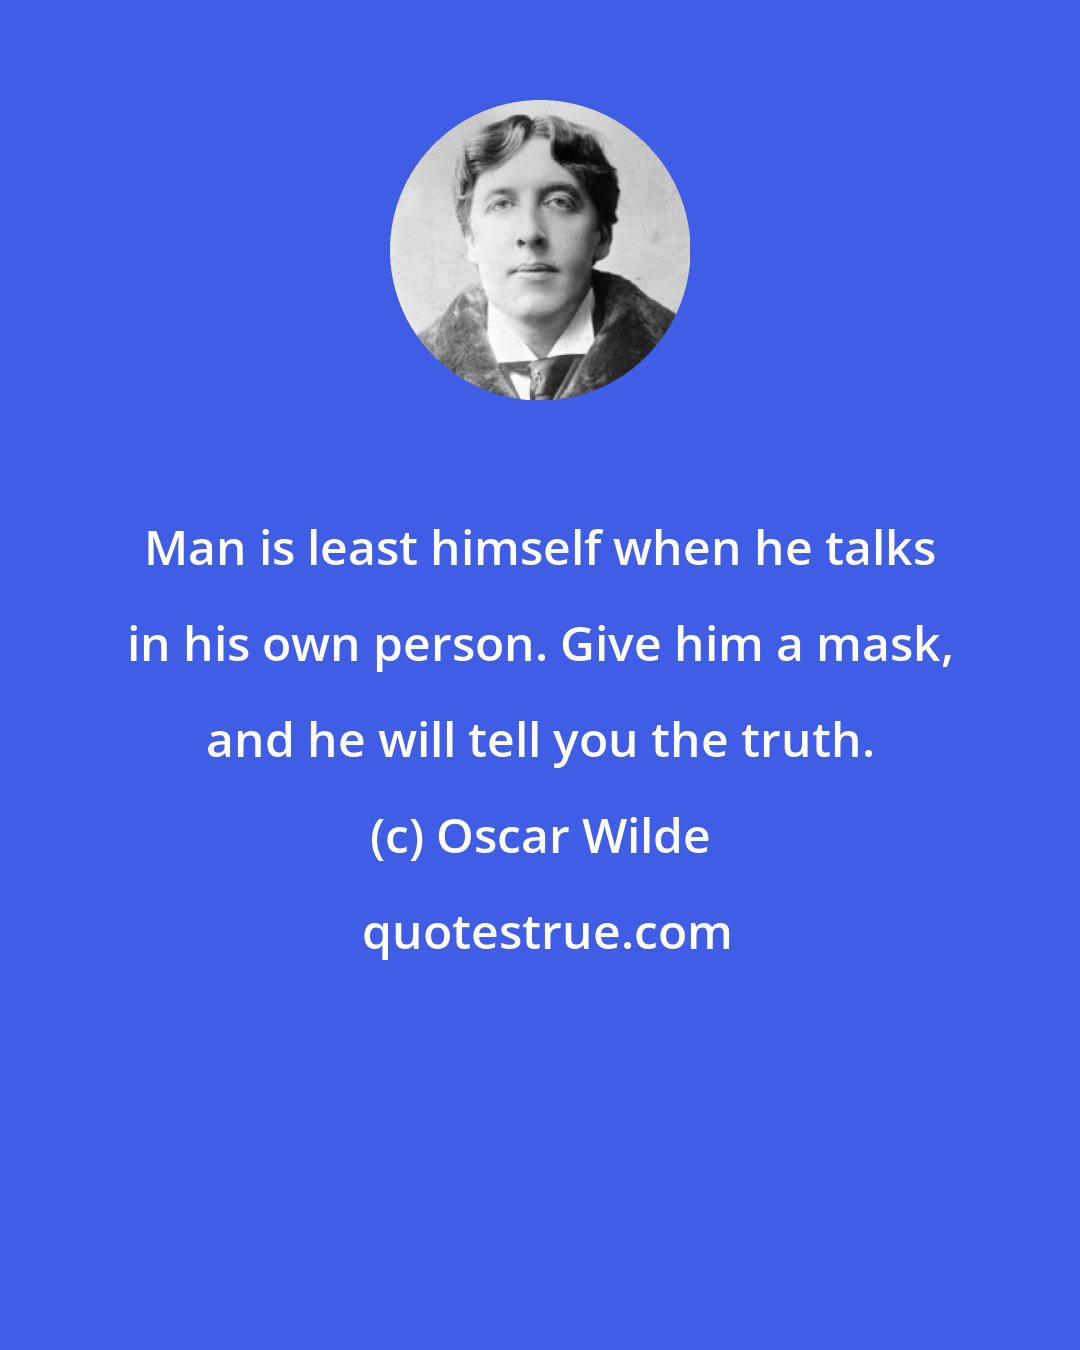 Oscar Wilde: Man is least himself when he talks in his own person. Give him a mask, and he will tell you the truth.